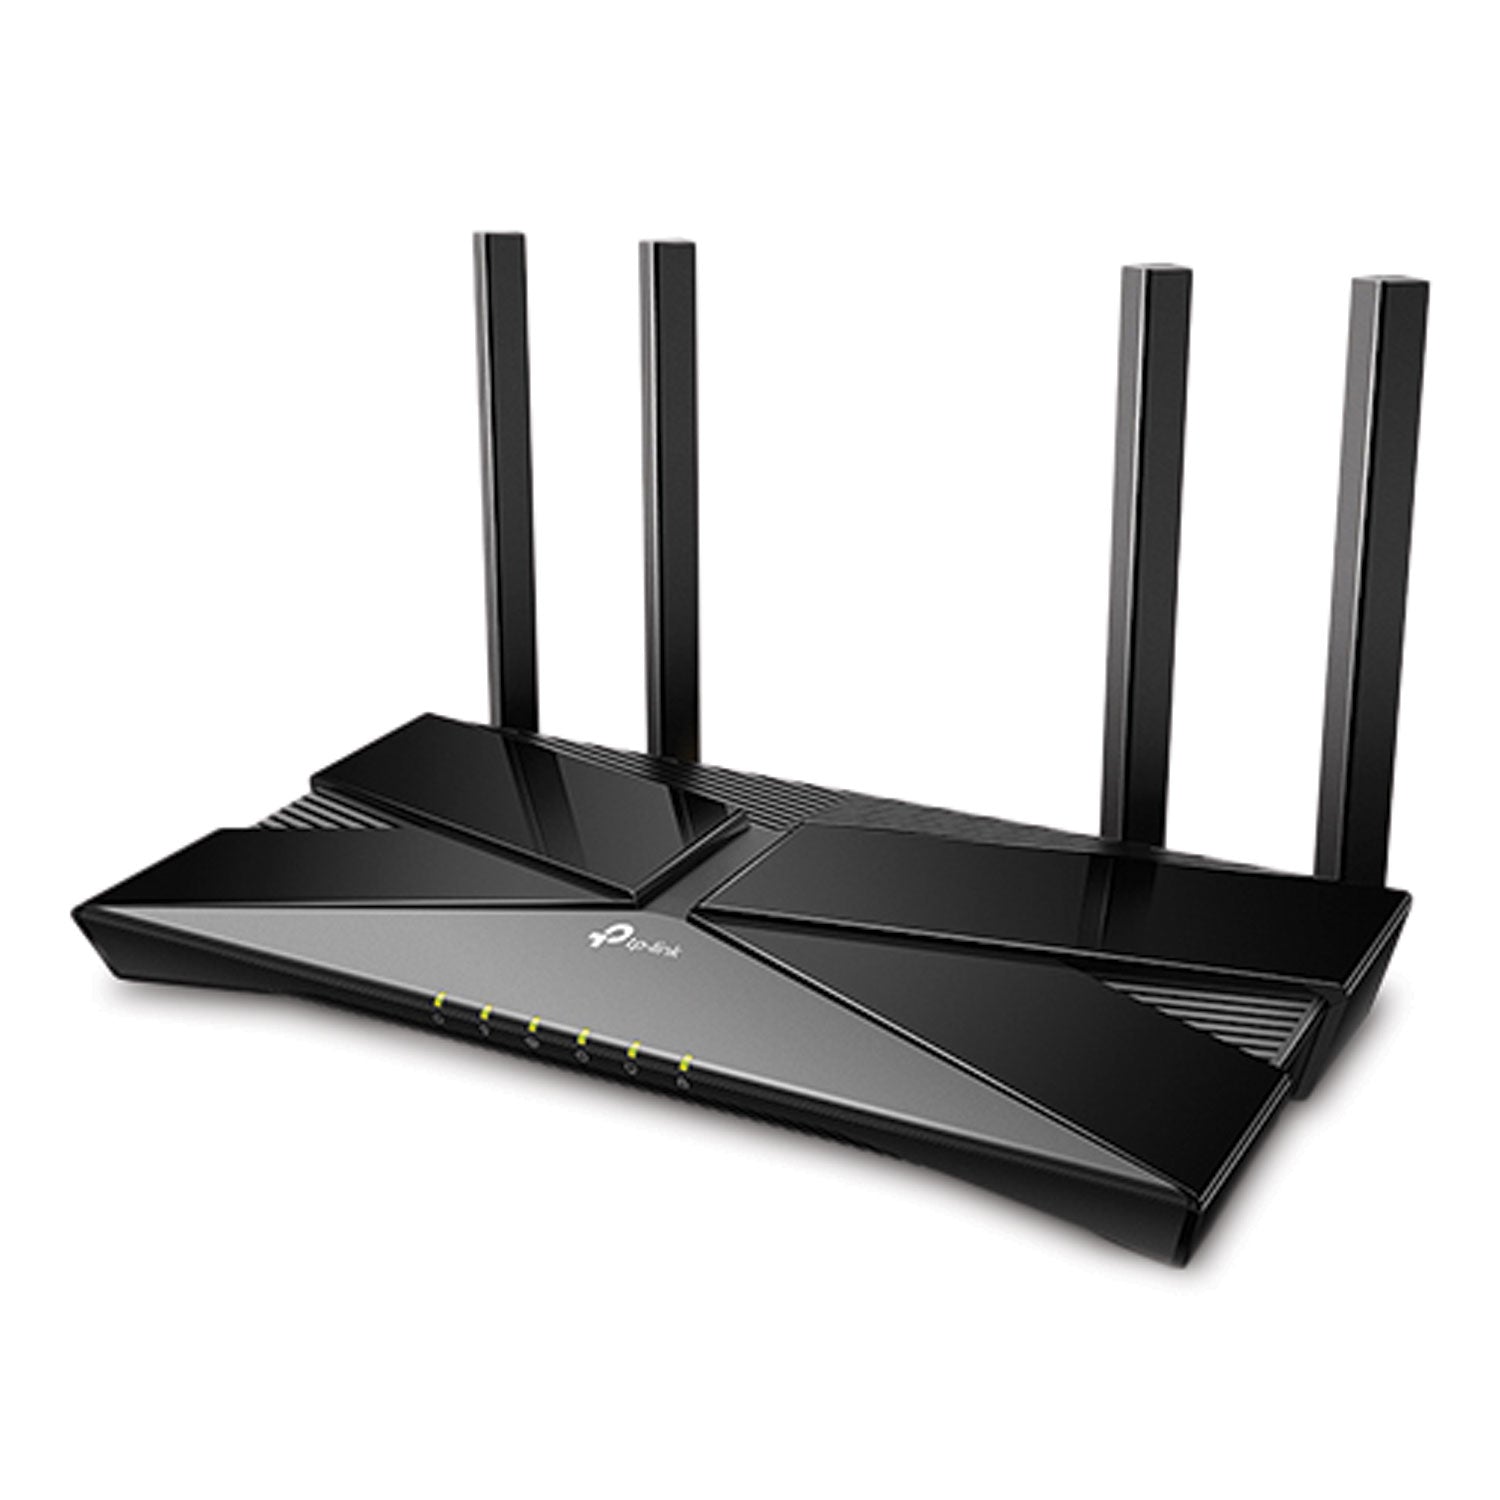 archer-ax1500-wireless-and-ethernet-router-5-ports-dual-band-24-ghz-5-ghz_tplarcherax1500 - 2